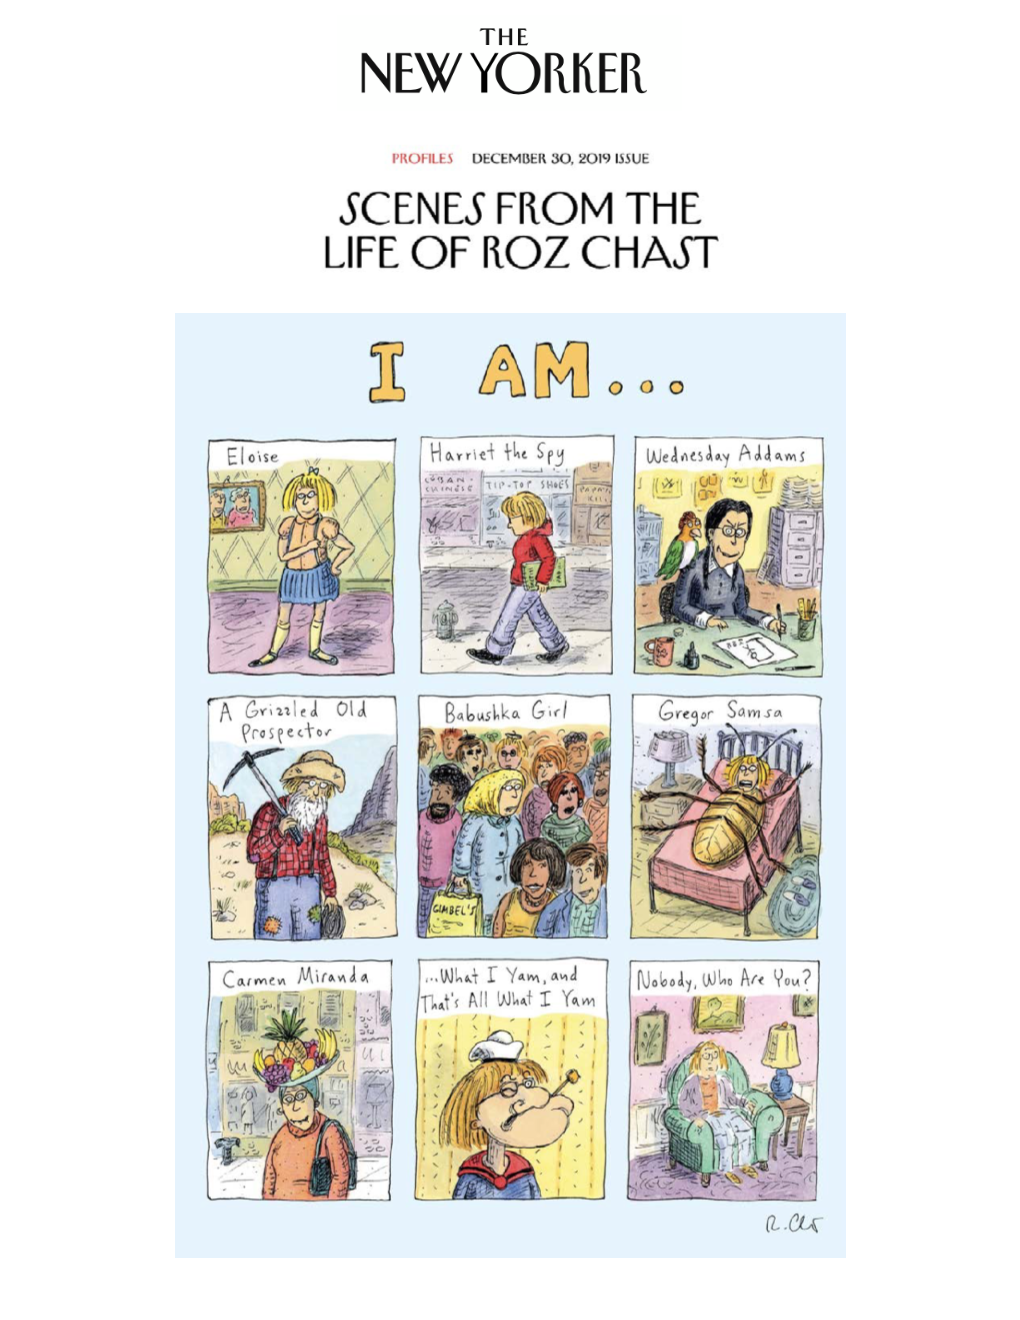 Scenes from the Life of Roz Chast Adam Gopnik, the New Yorker